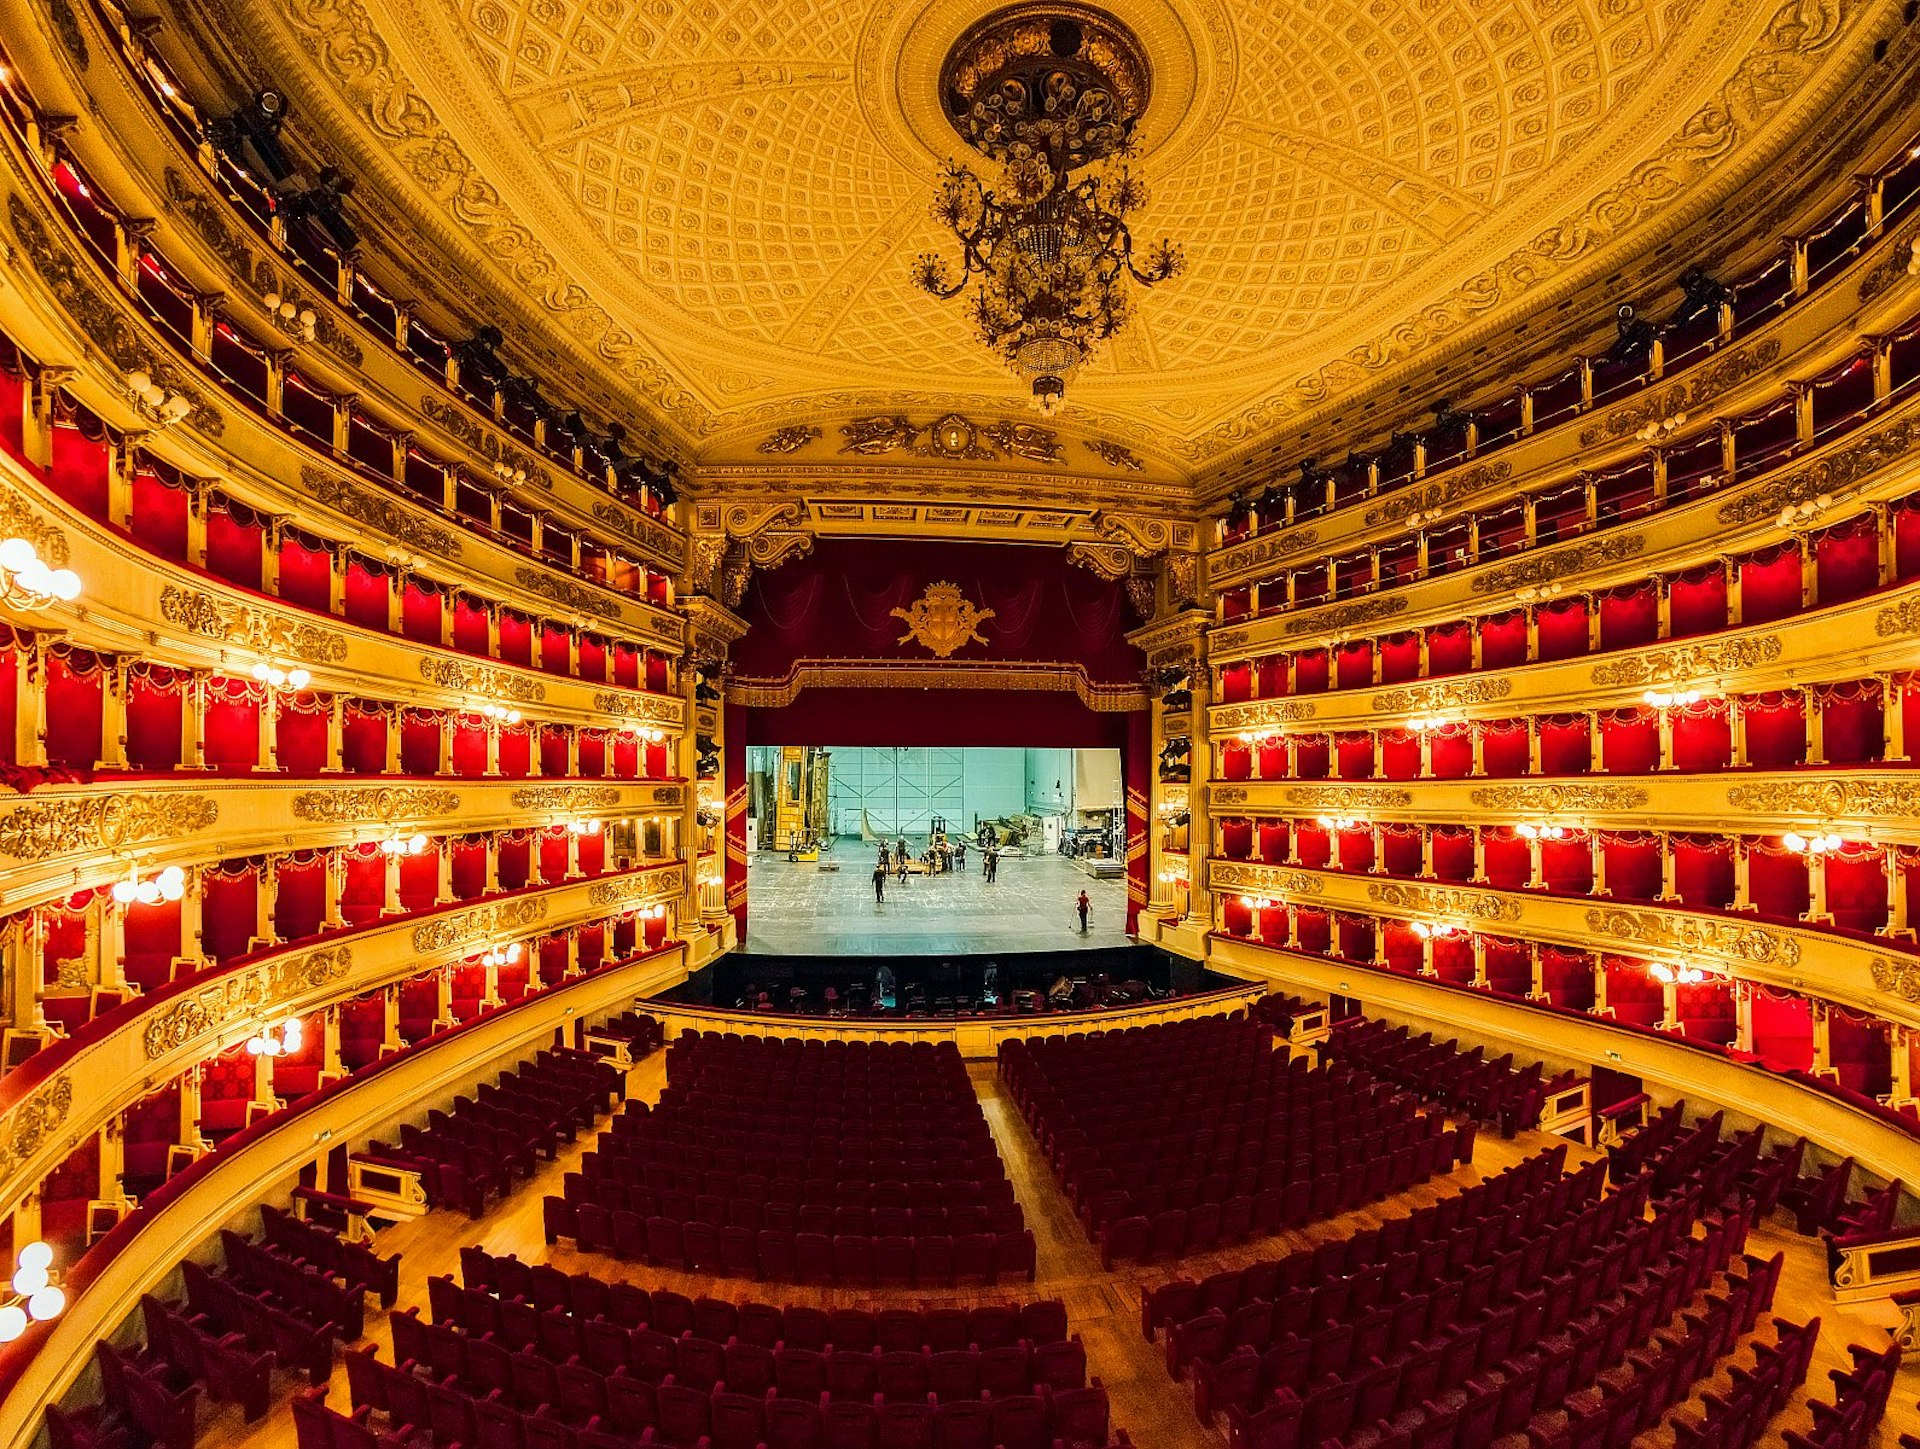 Looking out over the opulent interior of La Scala: a huge chandelier hangs from an ornate patterned ceiling; the walls are lined with six stories of red boxes; and there is read seating below. There are some workers on the stage.